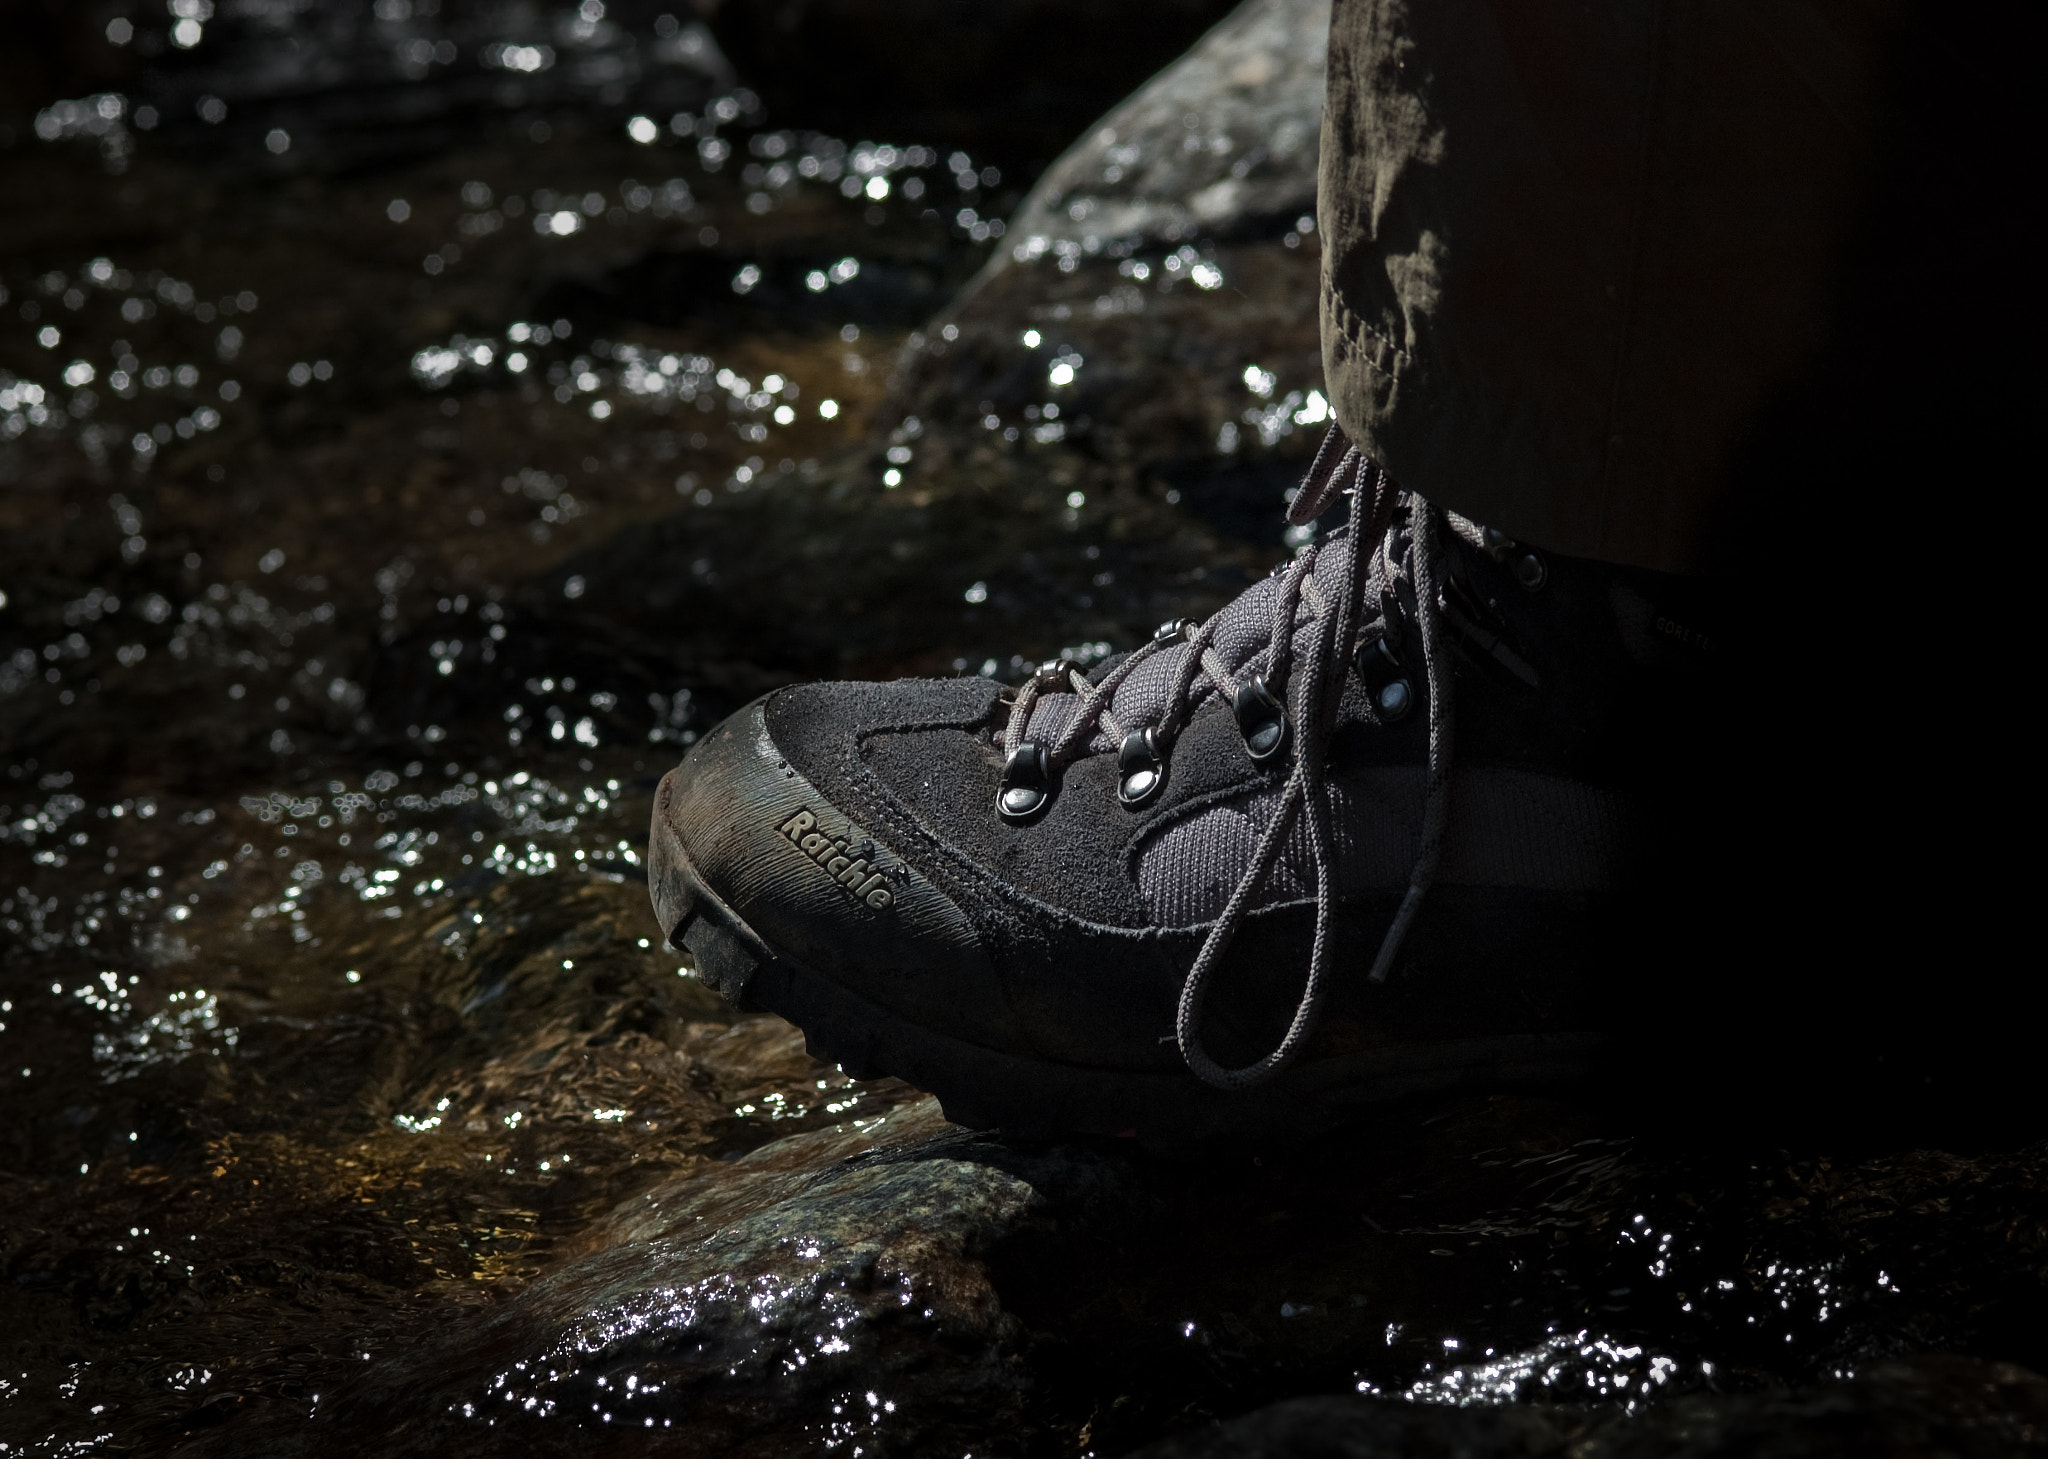 Nikon D70s + AF Micro-Nikkor 105mm f/2.8 sample photo. Gor-tex boots in river photography